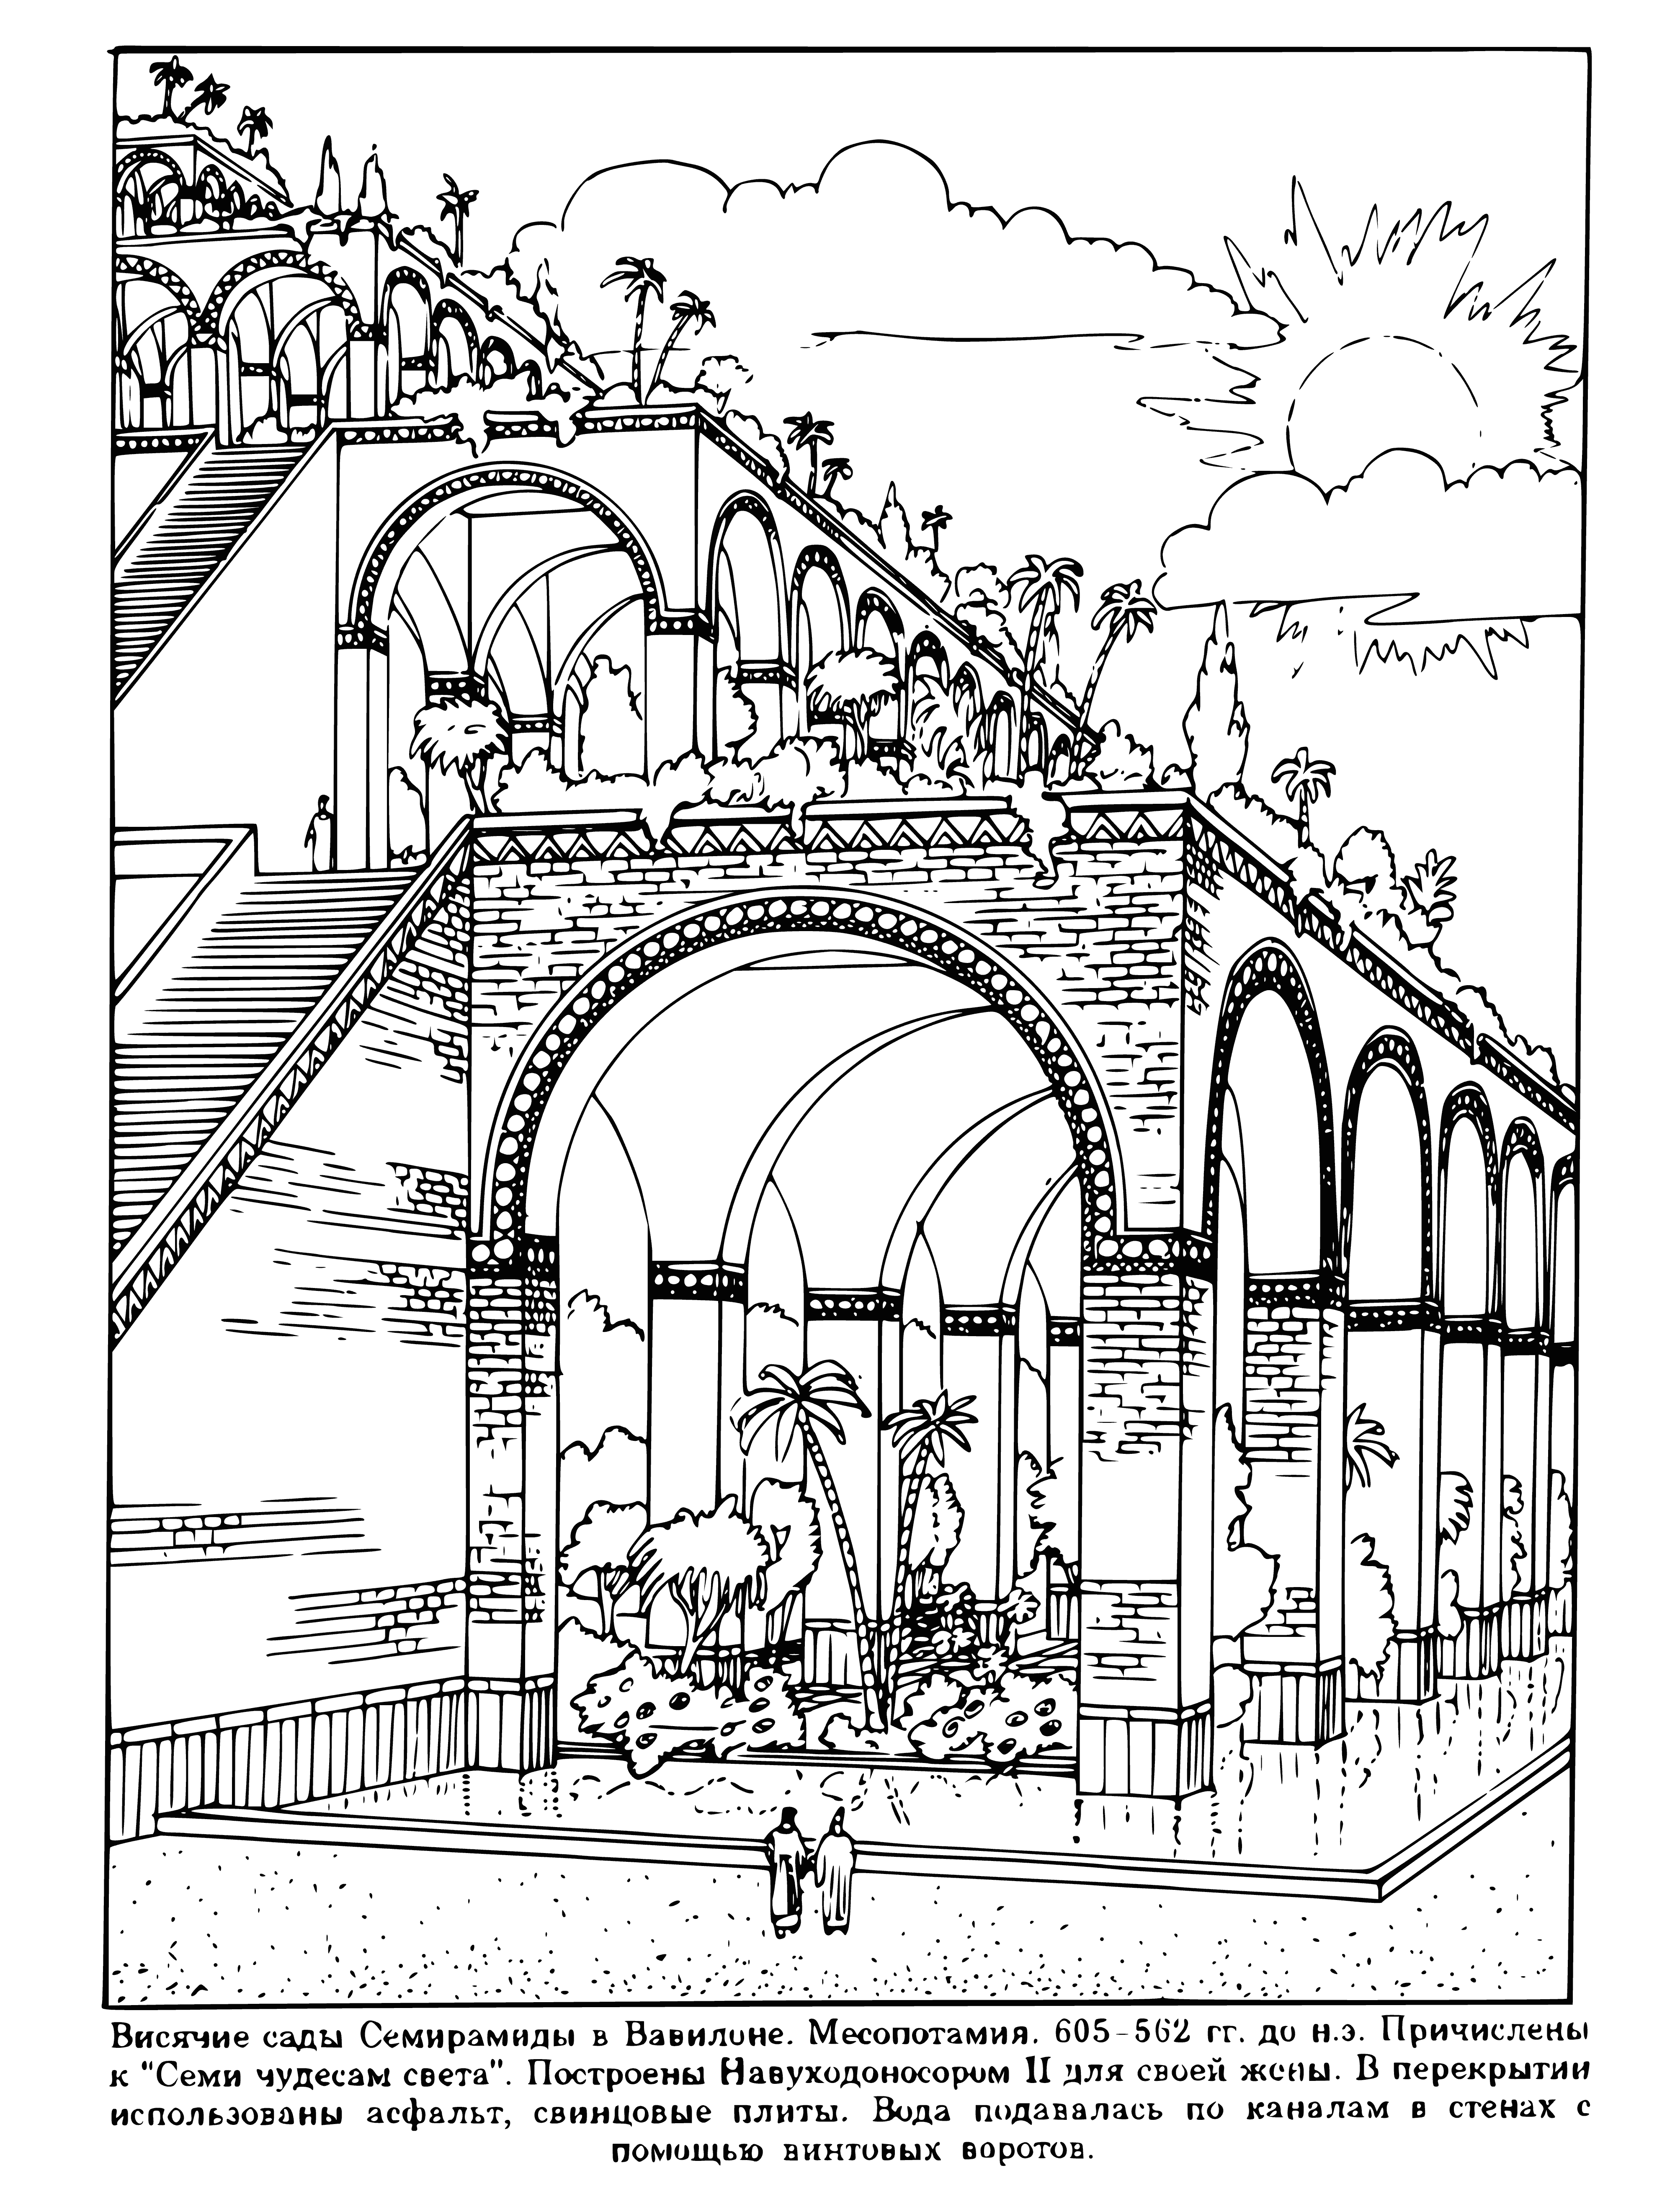 coloring page: Ancient Babylon's Gardens of Wonder were built by Nebuchadnezzar II in 6th century BCE and filled with exotic plants & animals. War destroyed them in 2nd century BCE, but left behind a legacy of mystery & awe.